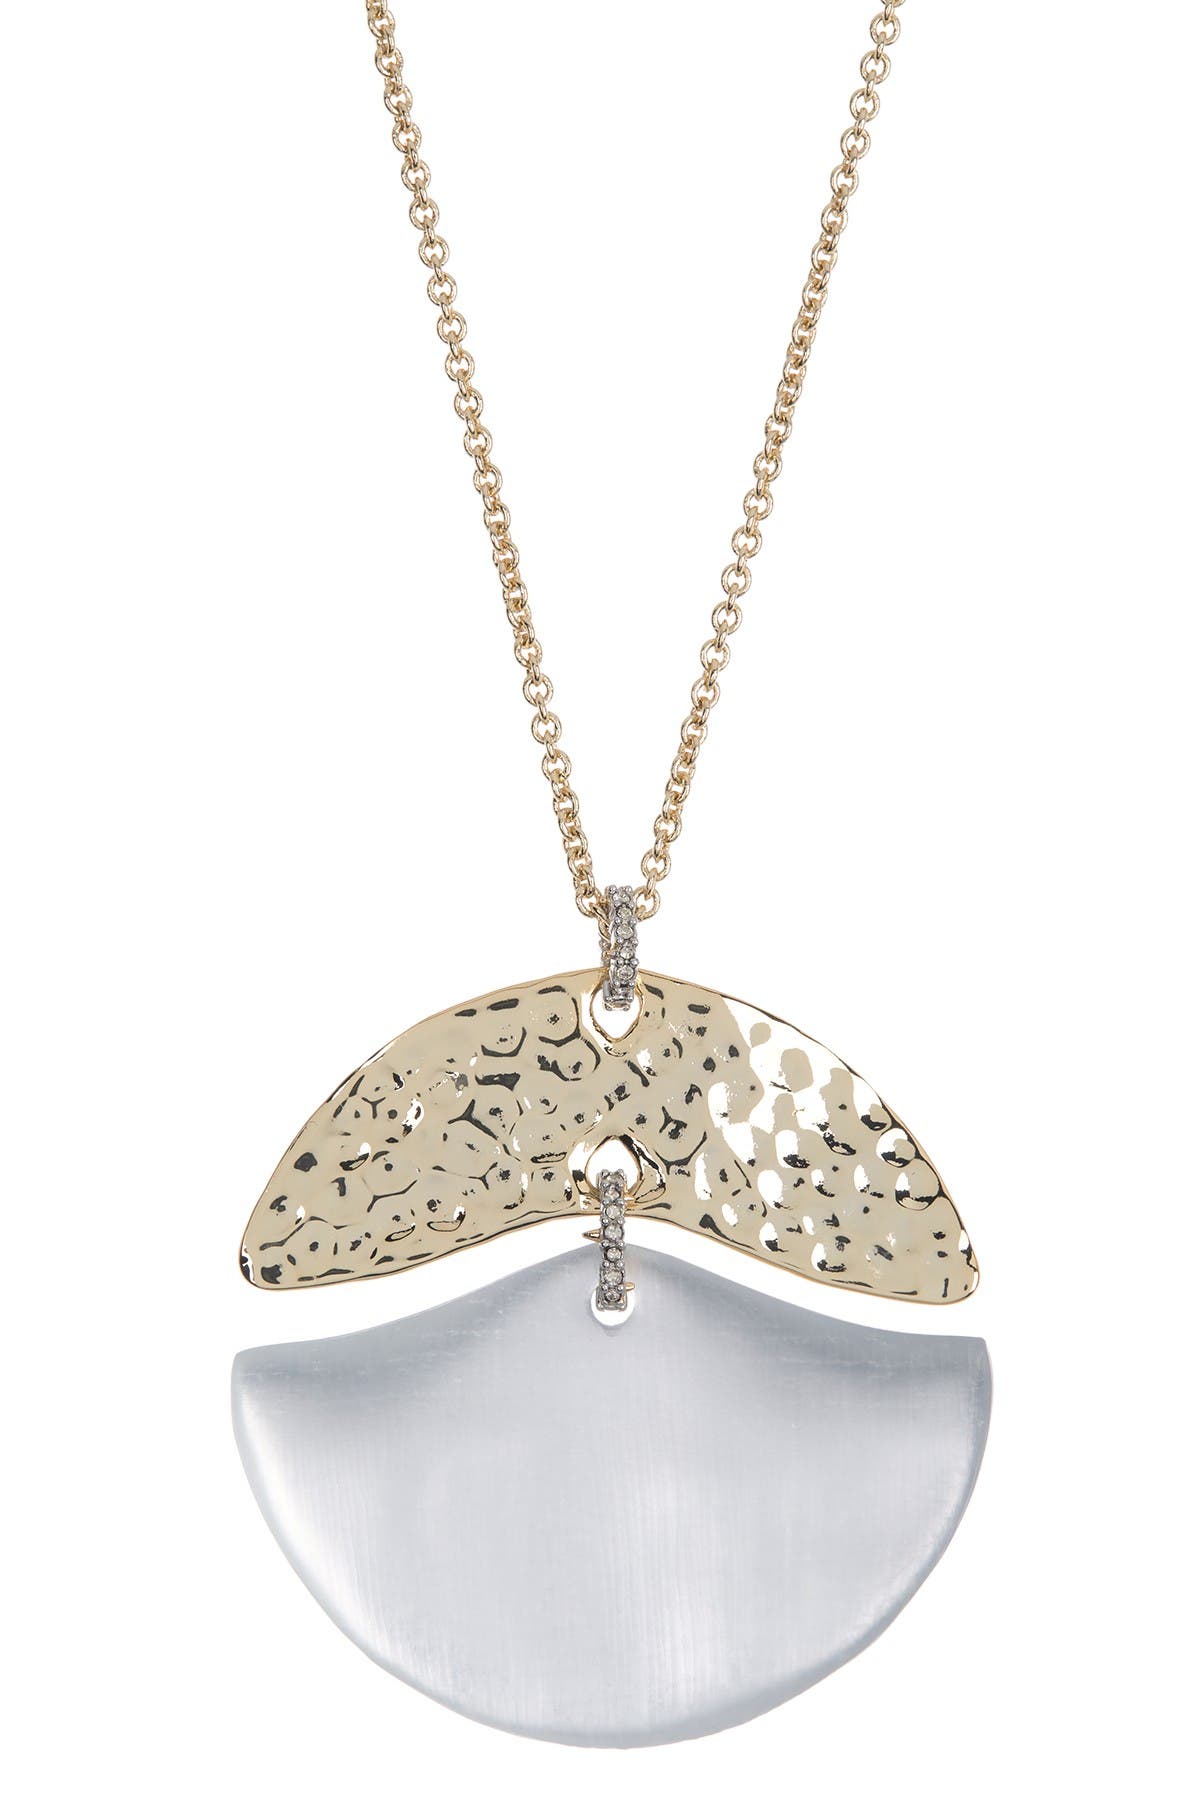 Alexis Bittar Hammered Mobile Pendant Necklace In Silver